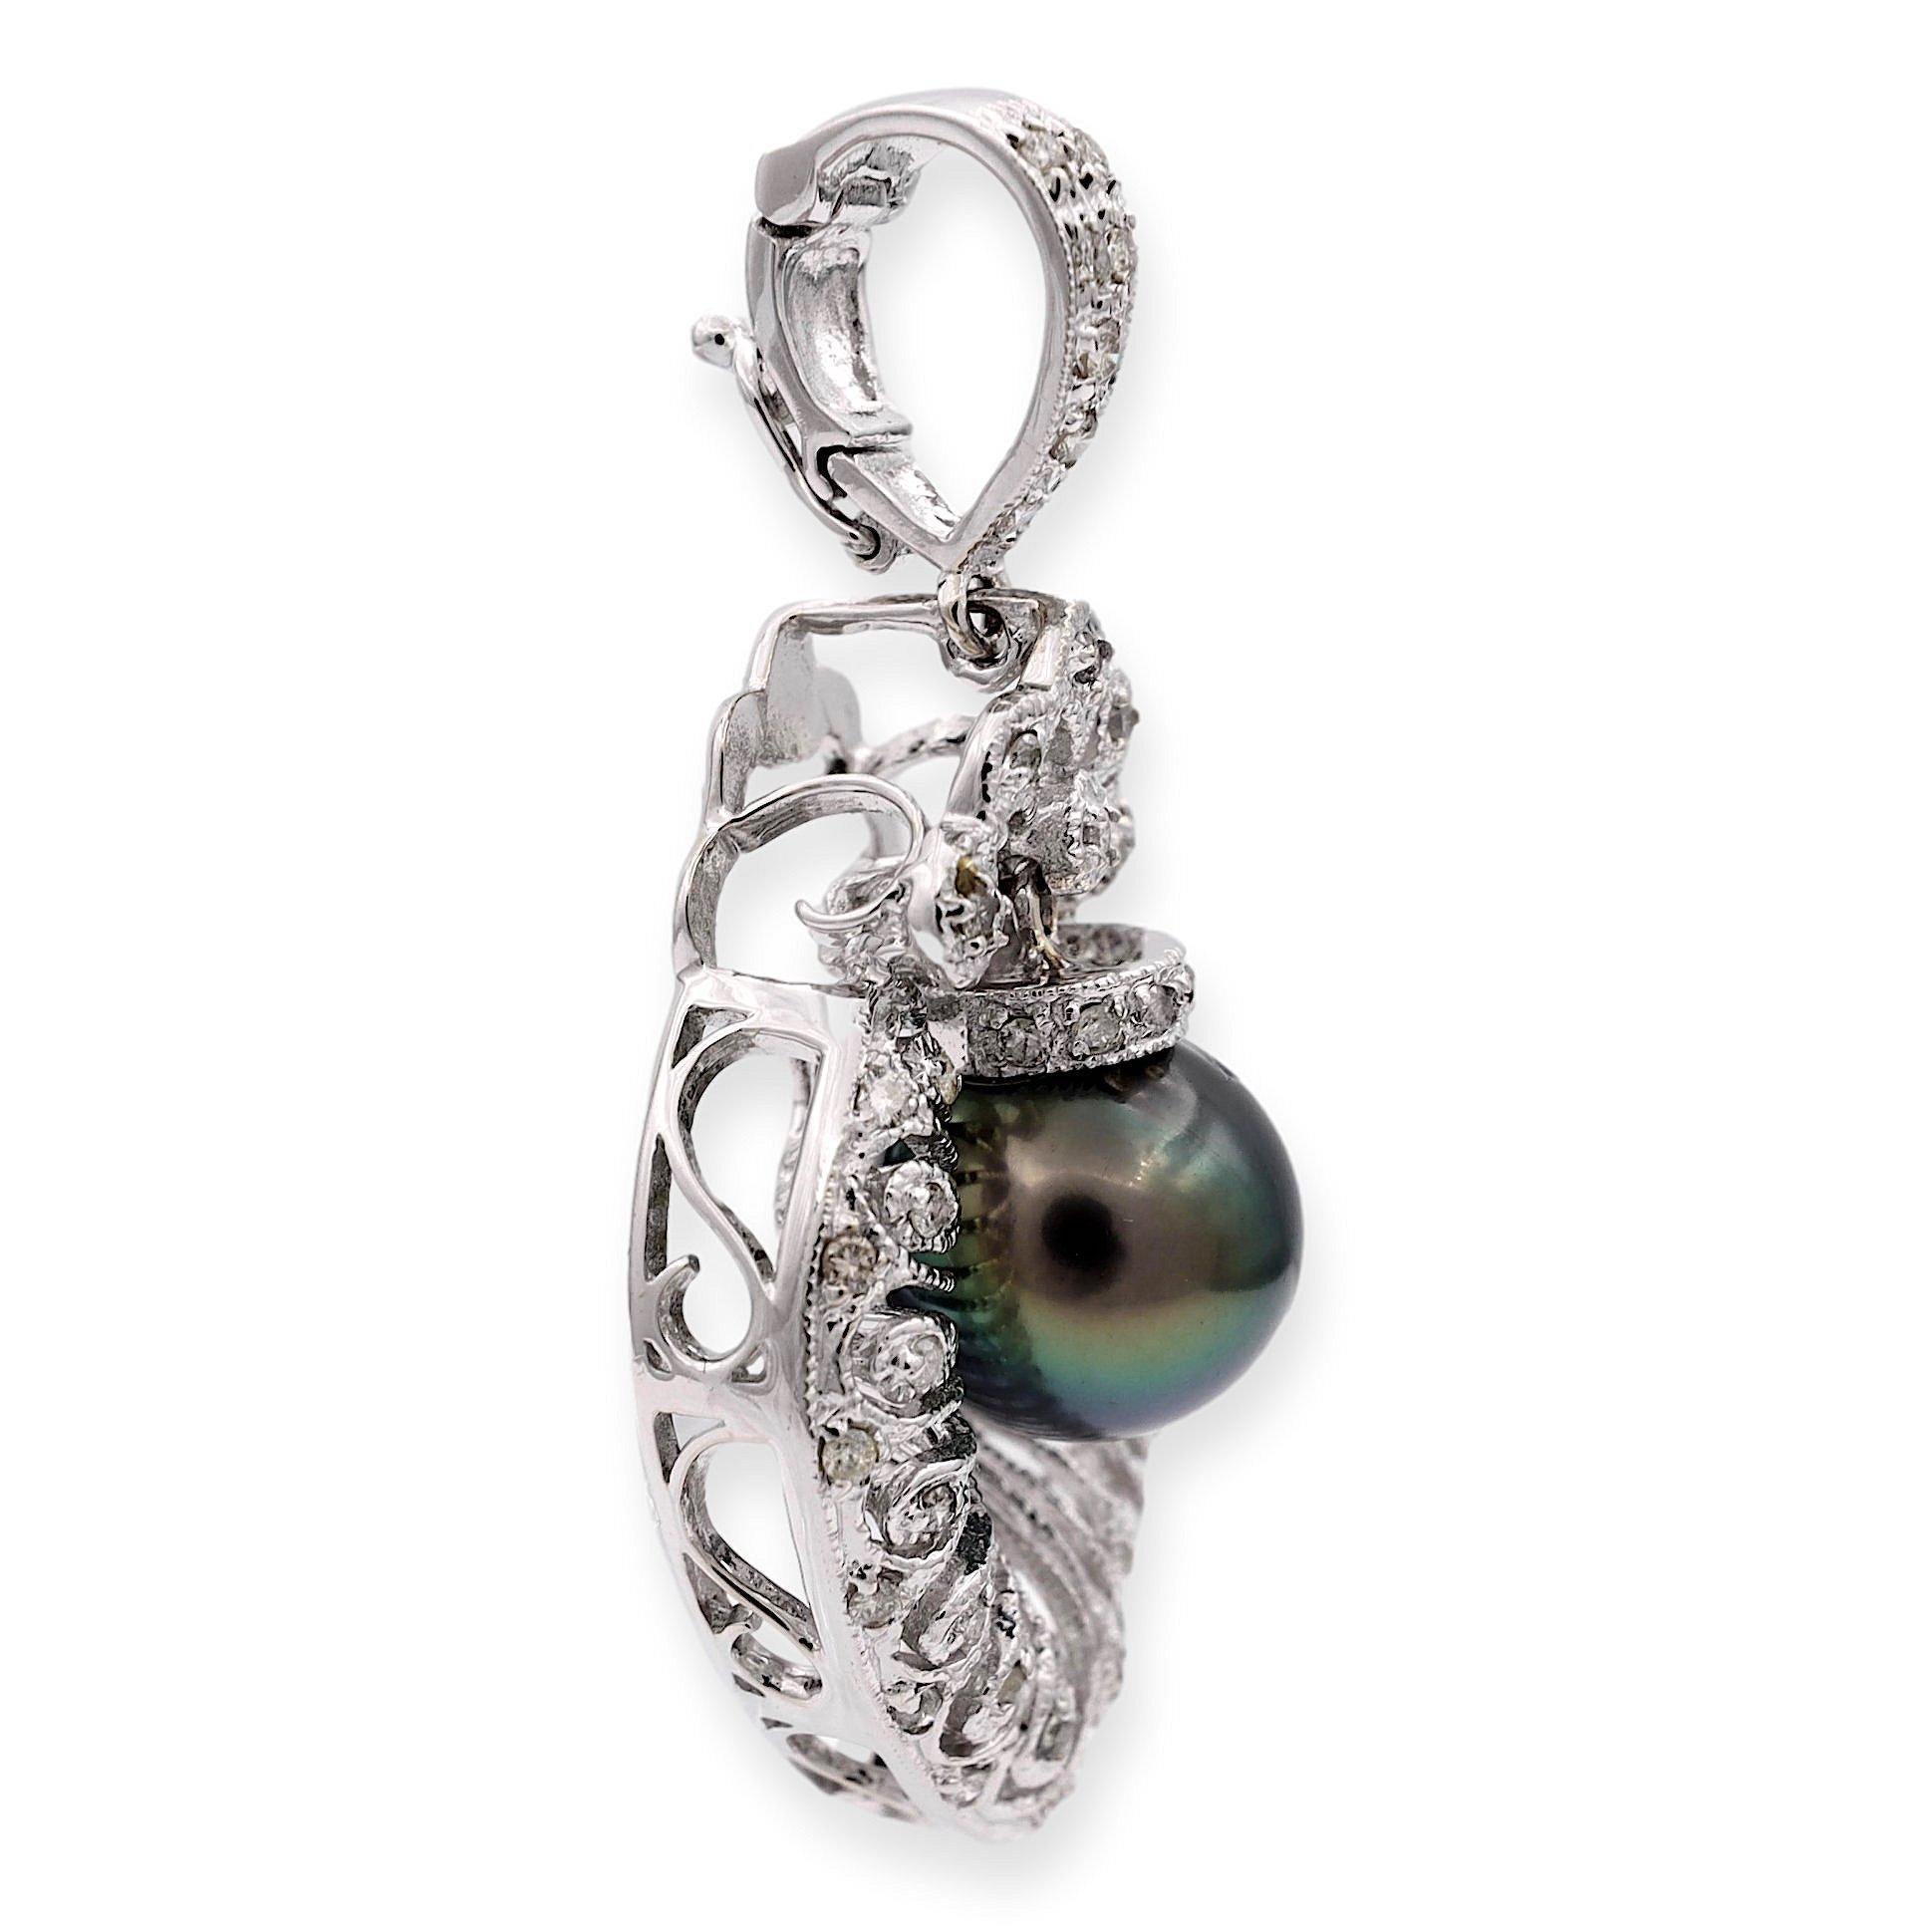 Diamond open scroll-work Pearl Pendant finely crafted in 18 karat white gold. At its center, a lustrous 10mm Tahitian pearl gracefully dangles, surrounded by a dazzling embrace of diamonds on the cap and throughout, weighing approximately 0.25